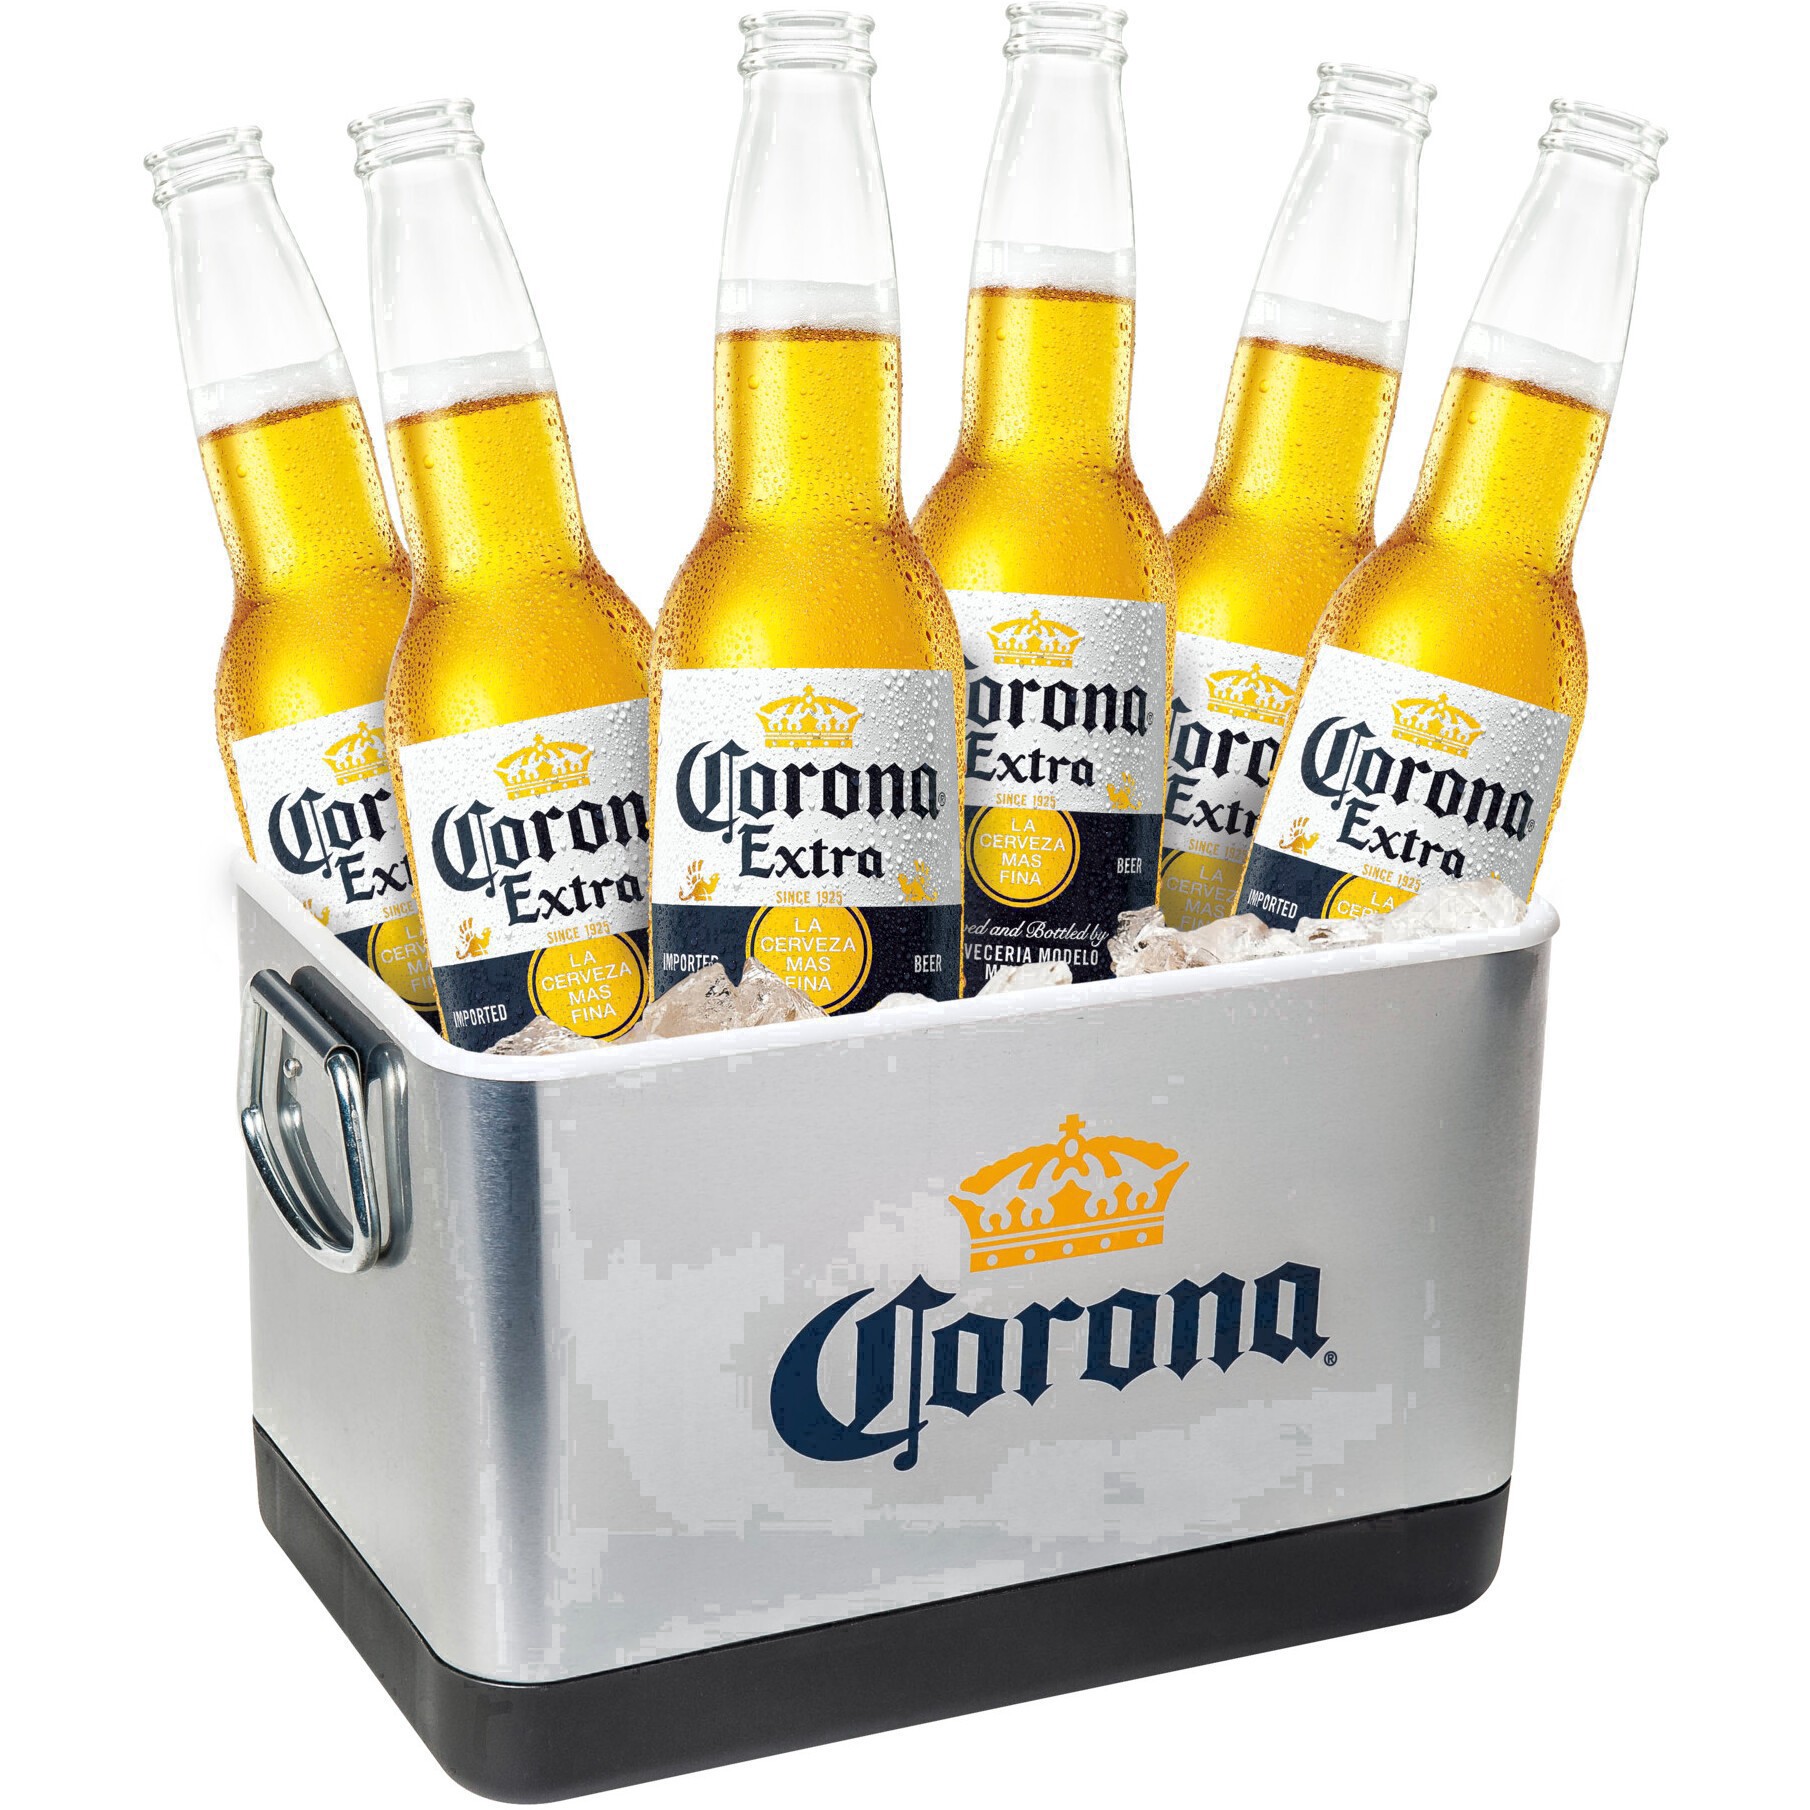 slide 22 of 98, Corona Extra Lager Mexican Beer Bottles, 12 oz